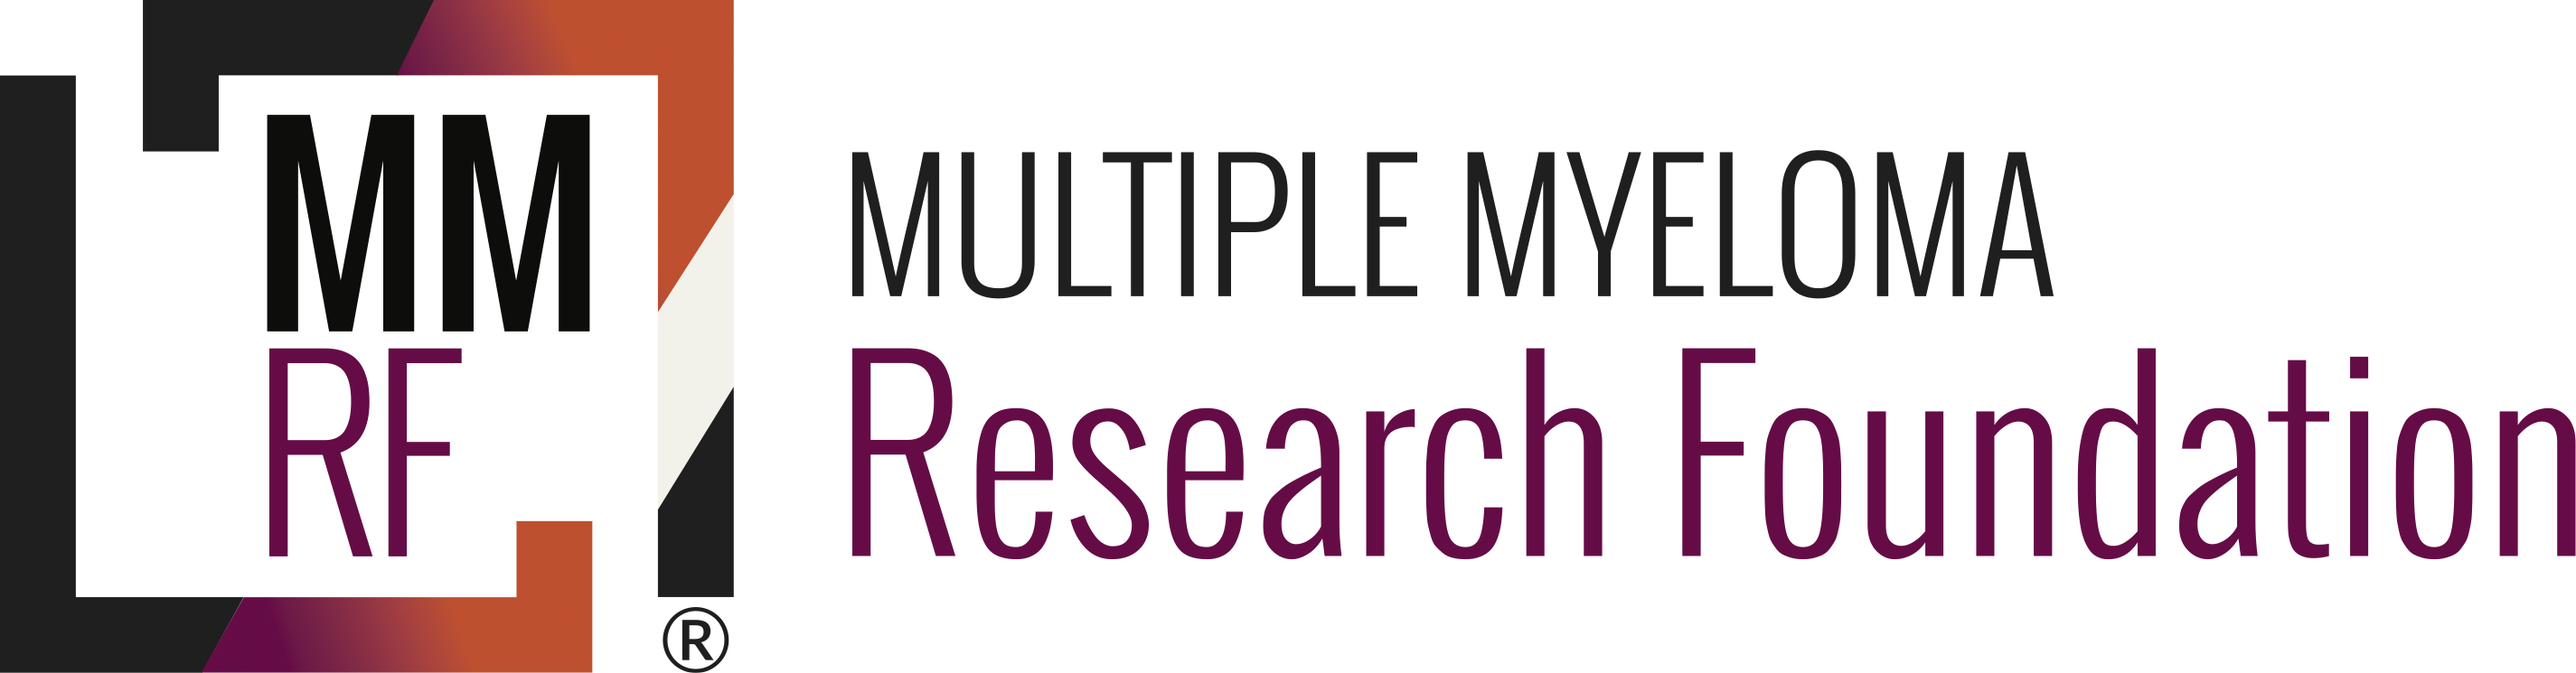 The Multiple Myeloma Research Foundation